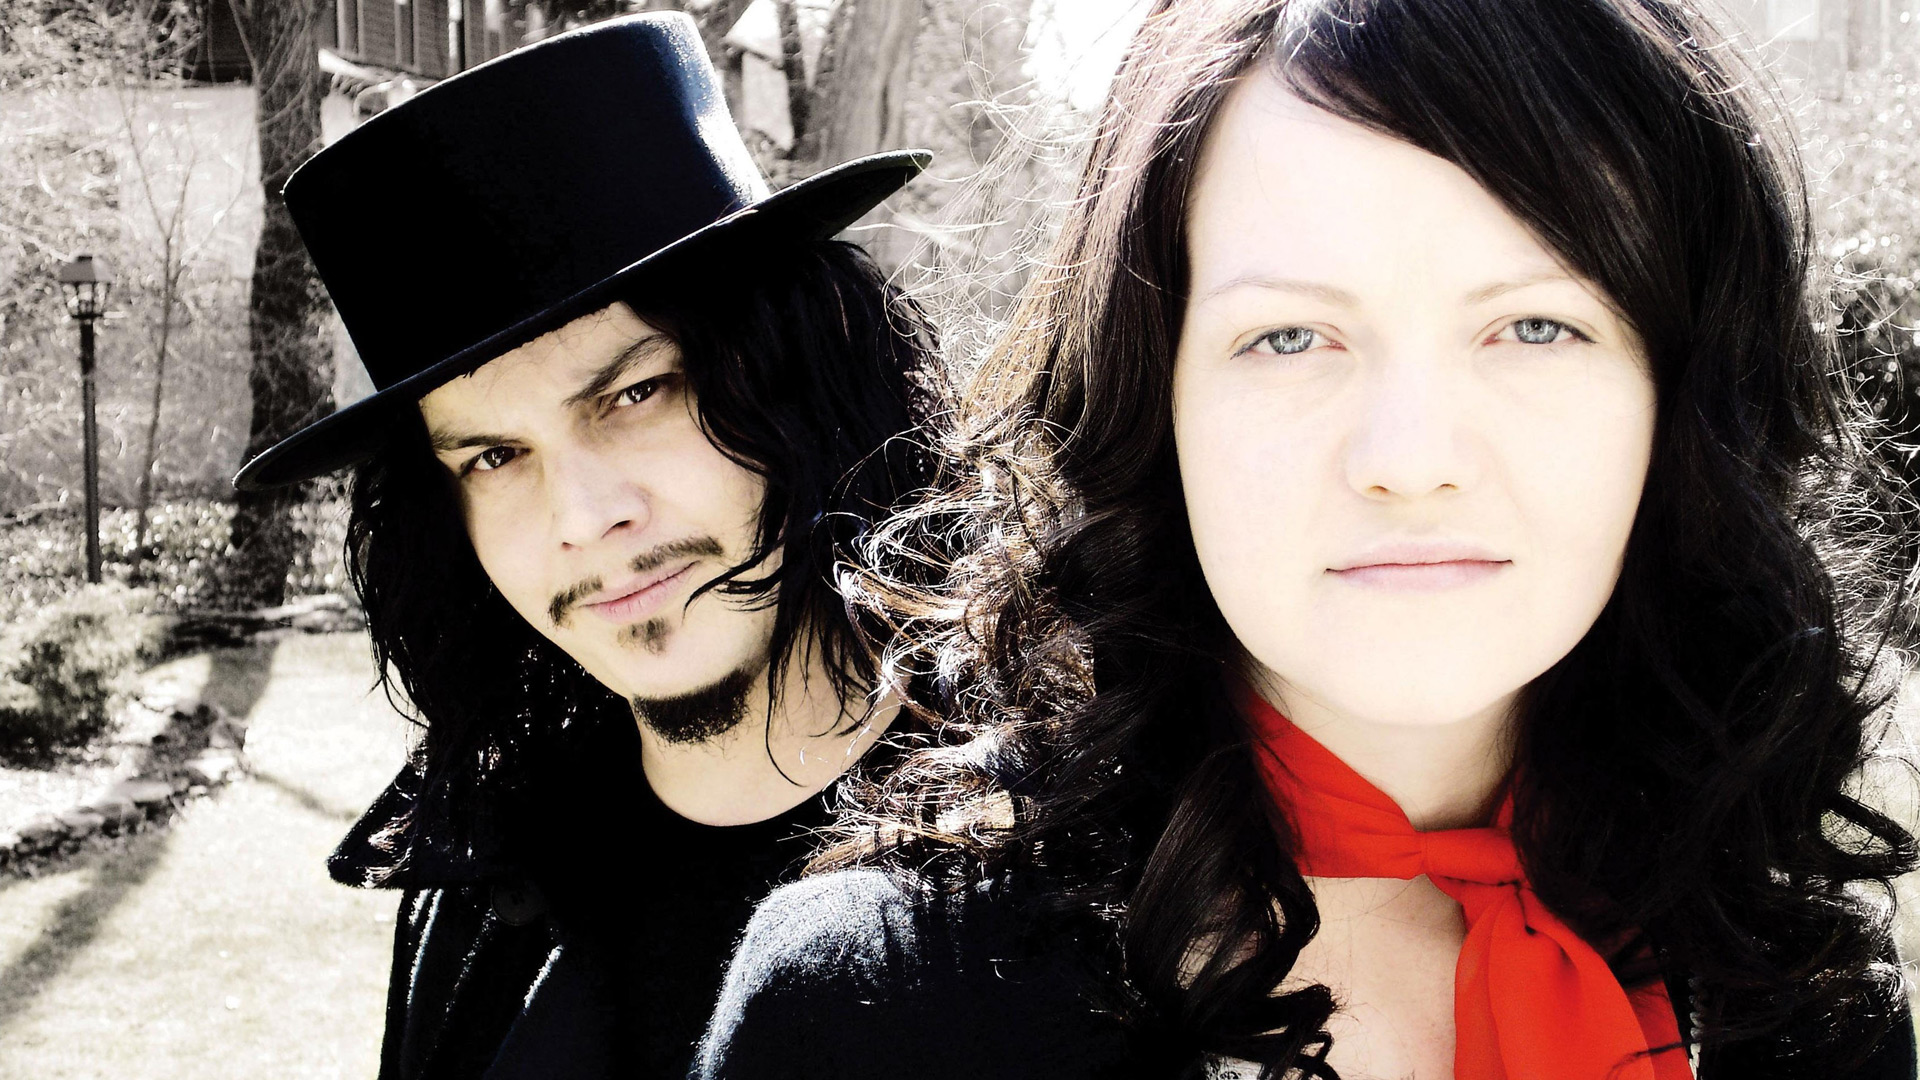 You Don't Know What Love Is av The White Stripes